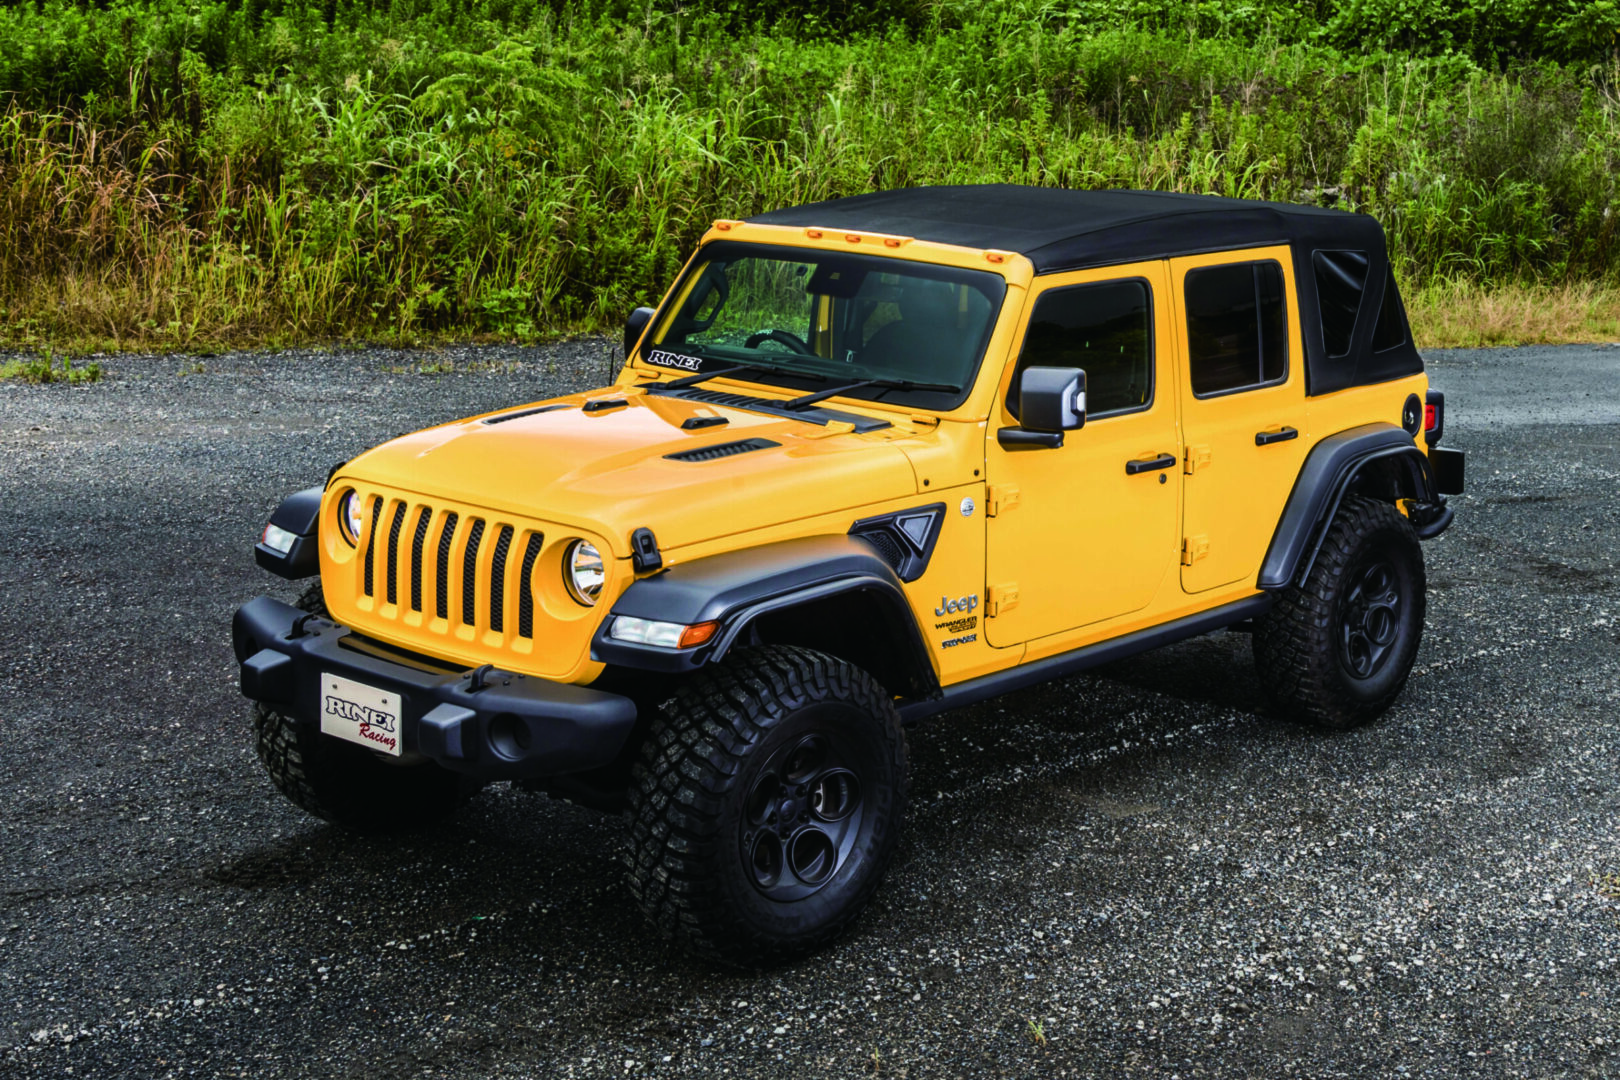 JEEP Wrangler Unlimited by Rinei